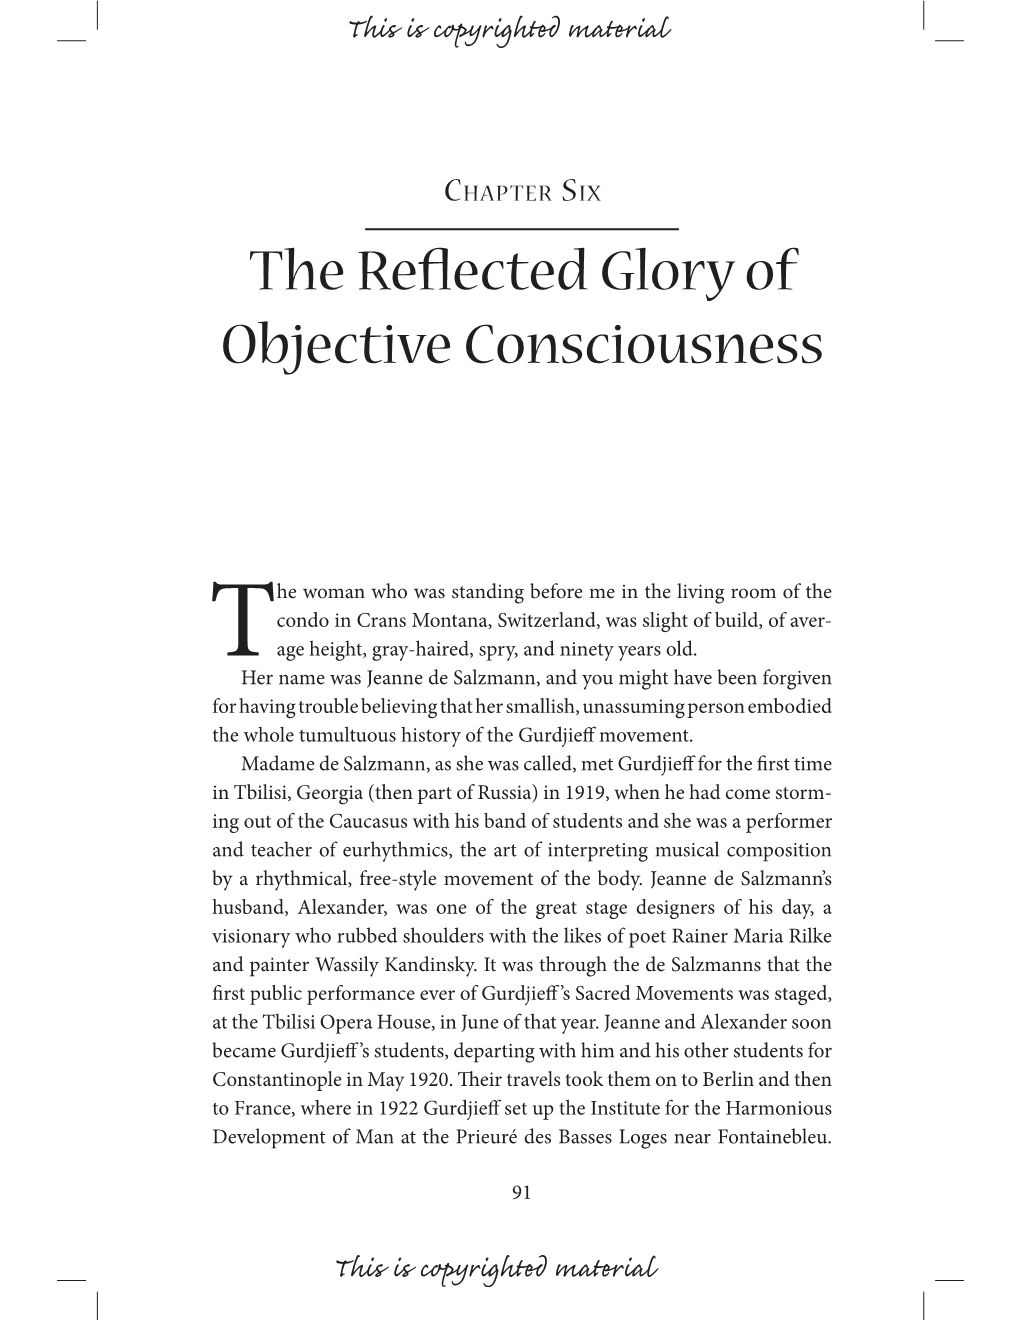 THE REFLECTED GLORY of OBJECTIVE CONSCIOUSNESS Taught Me an Exercise, One Used by Gurdjie! , Having to Do with Sensing the & Ow of Energies Through the Body